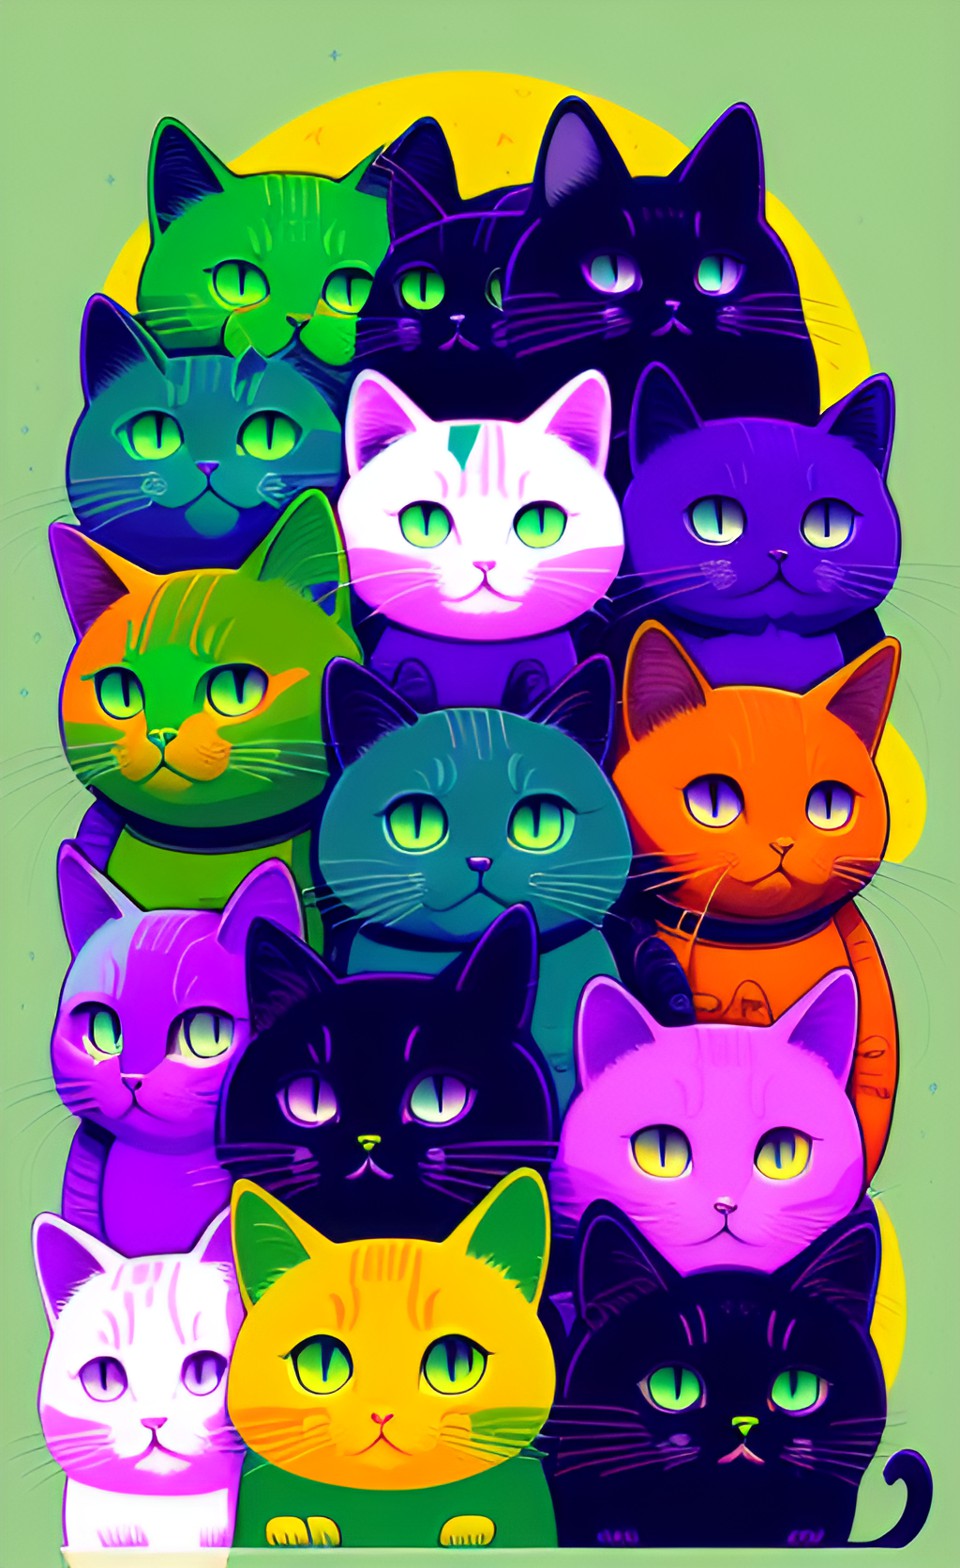 Cats in various colors